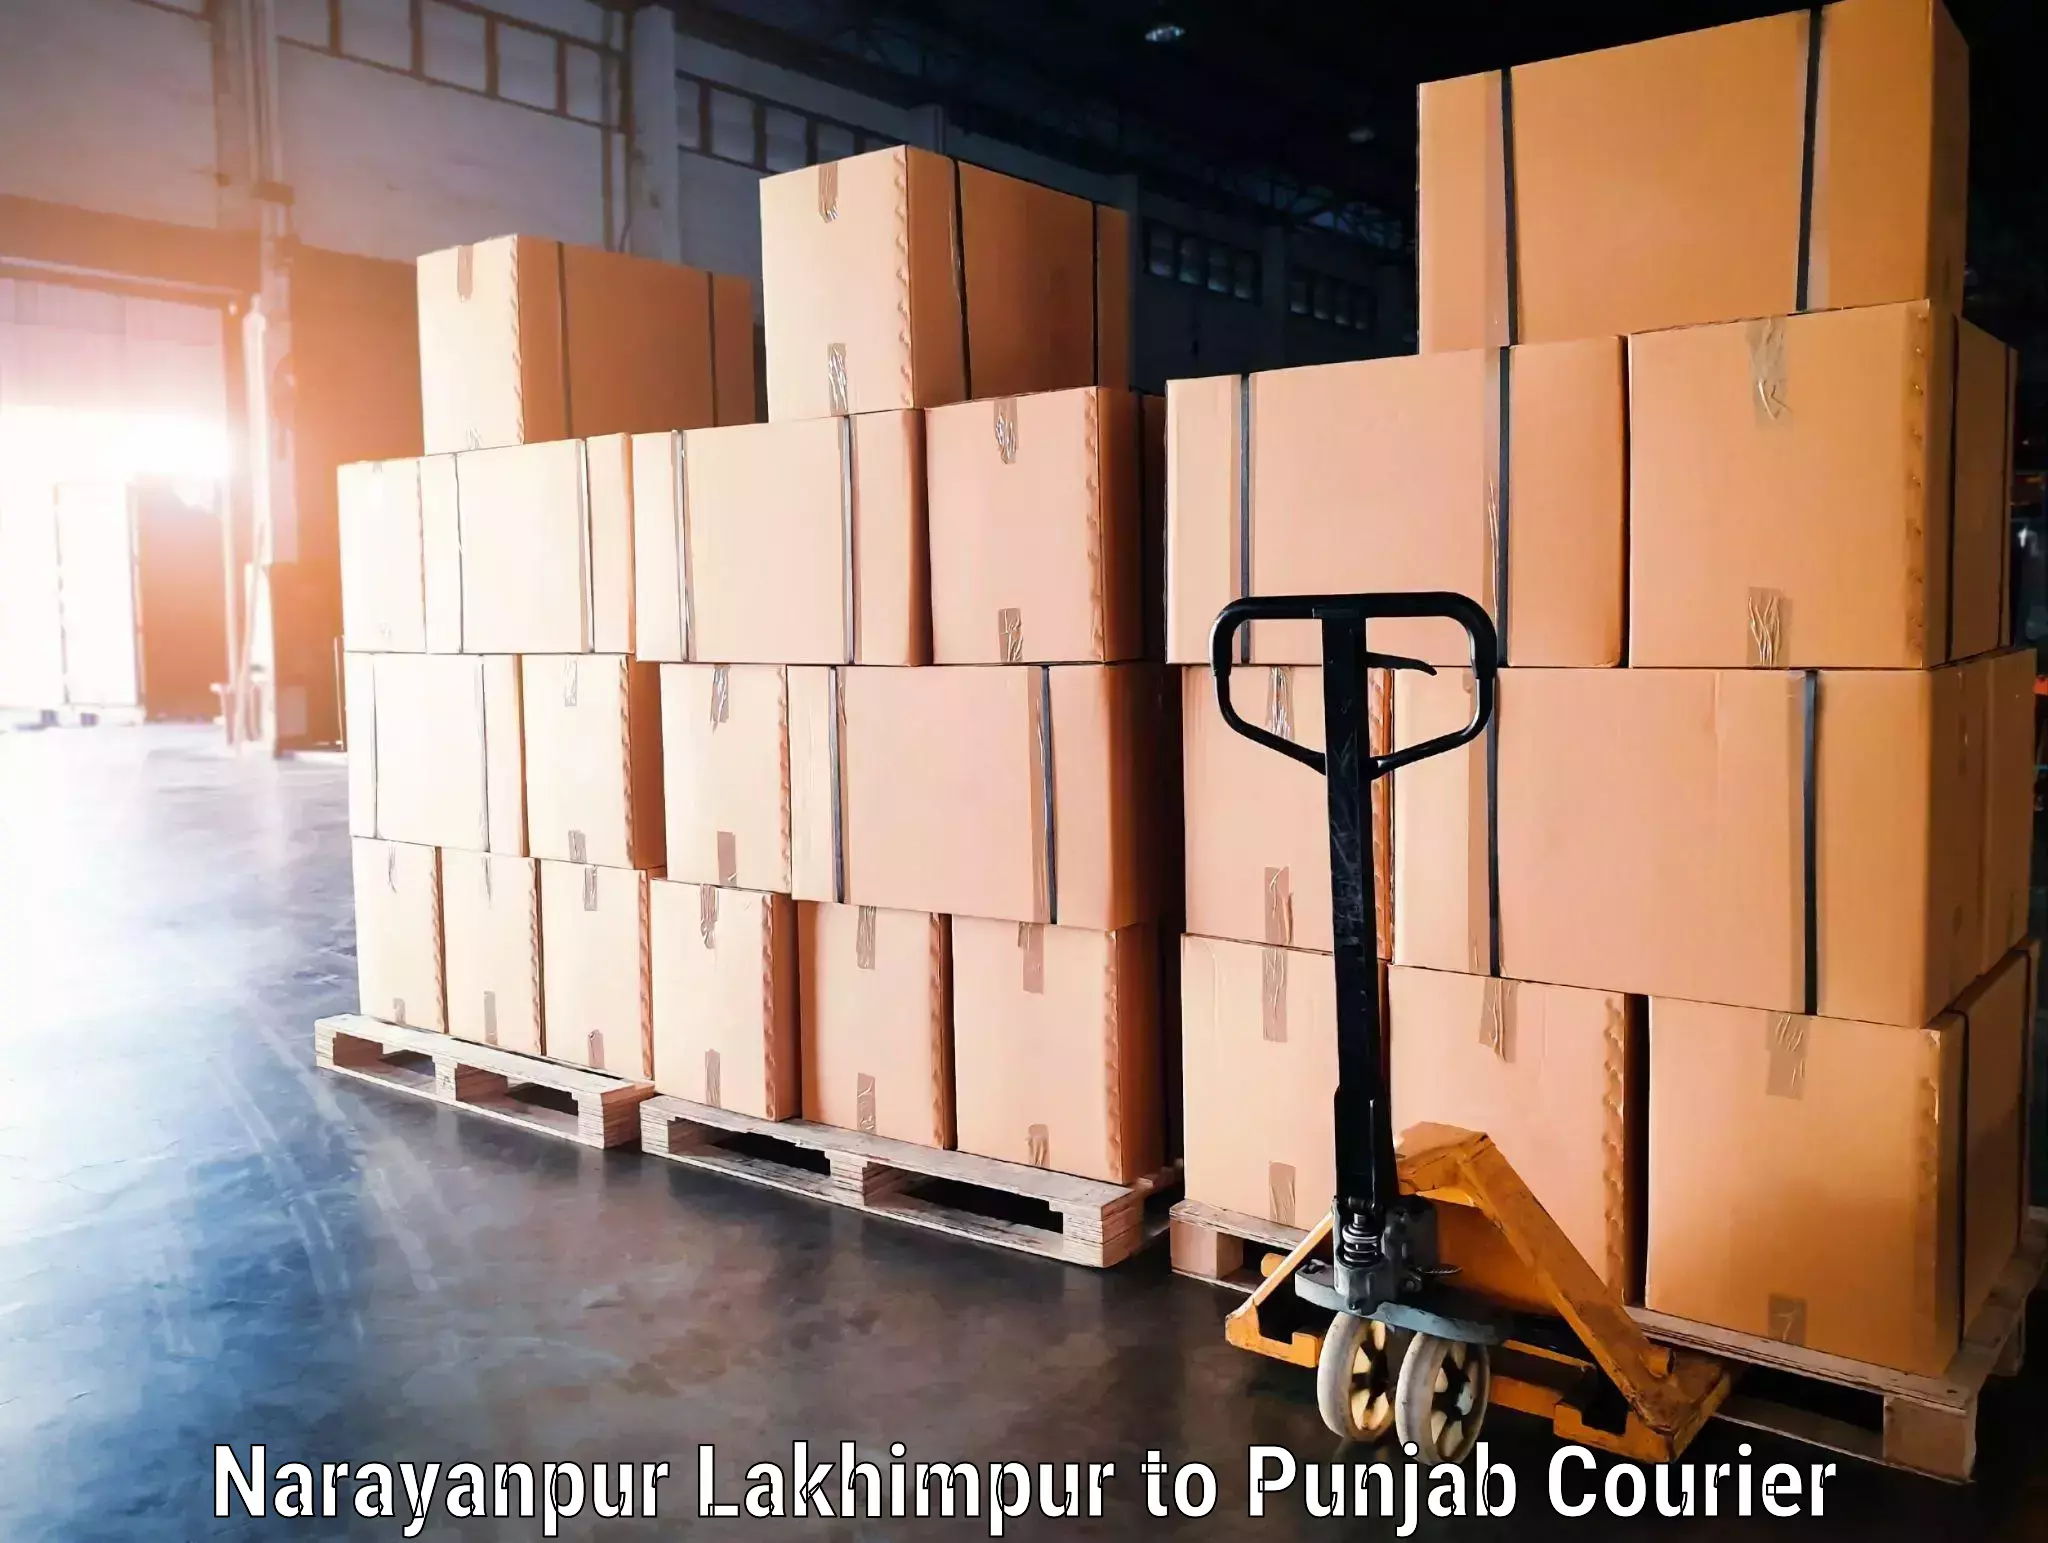 Luggage storage and delivery Narayanpur Lakhimpur to Pathankot